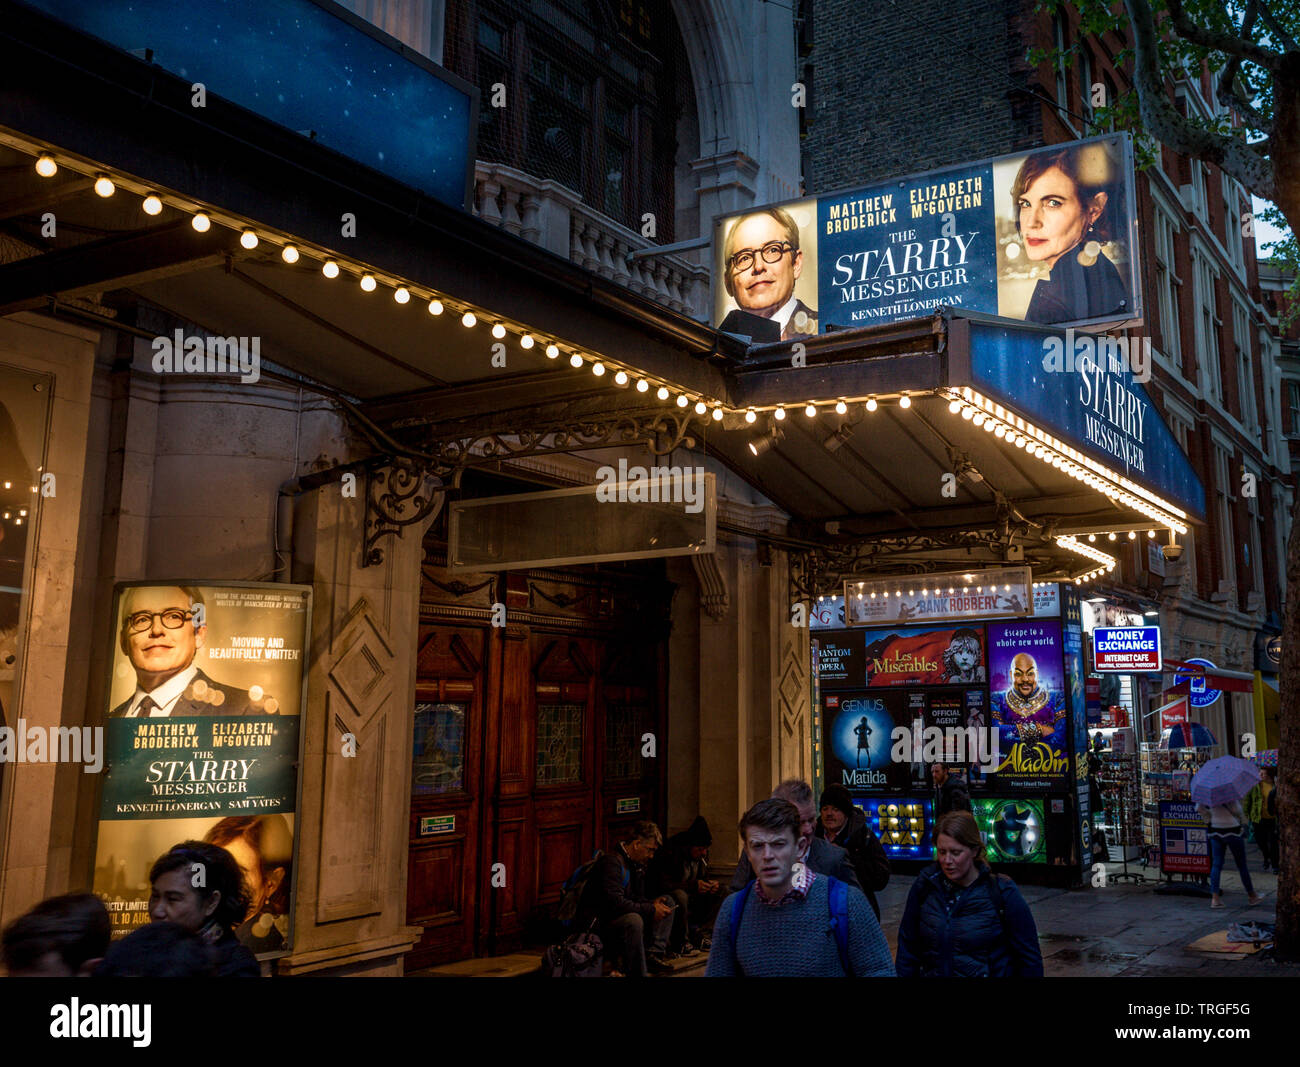 Advertisement for Kenneth Lonergan’s The Starry Messenger, Starring Matthew Broderick and Elizabeth McGovern outside Wyndham's Theatre, London. Stock Photo